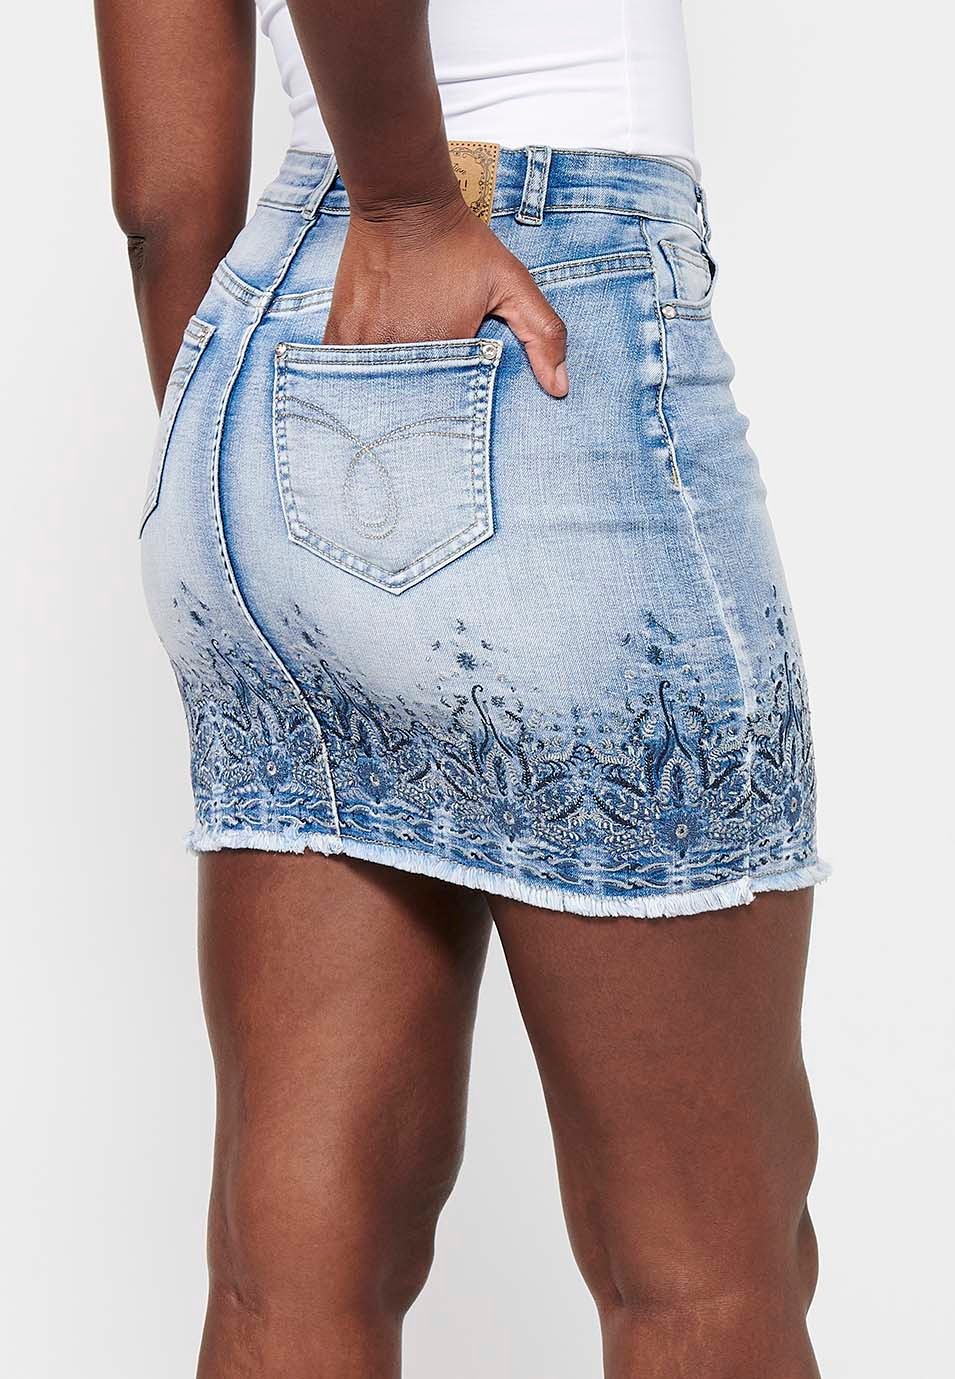 Short denim skirt with embroidered details and front closure with zipper and button in Blue for Women 5